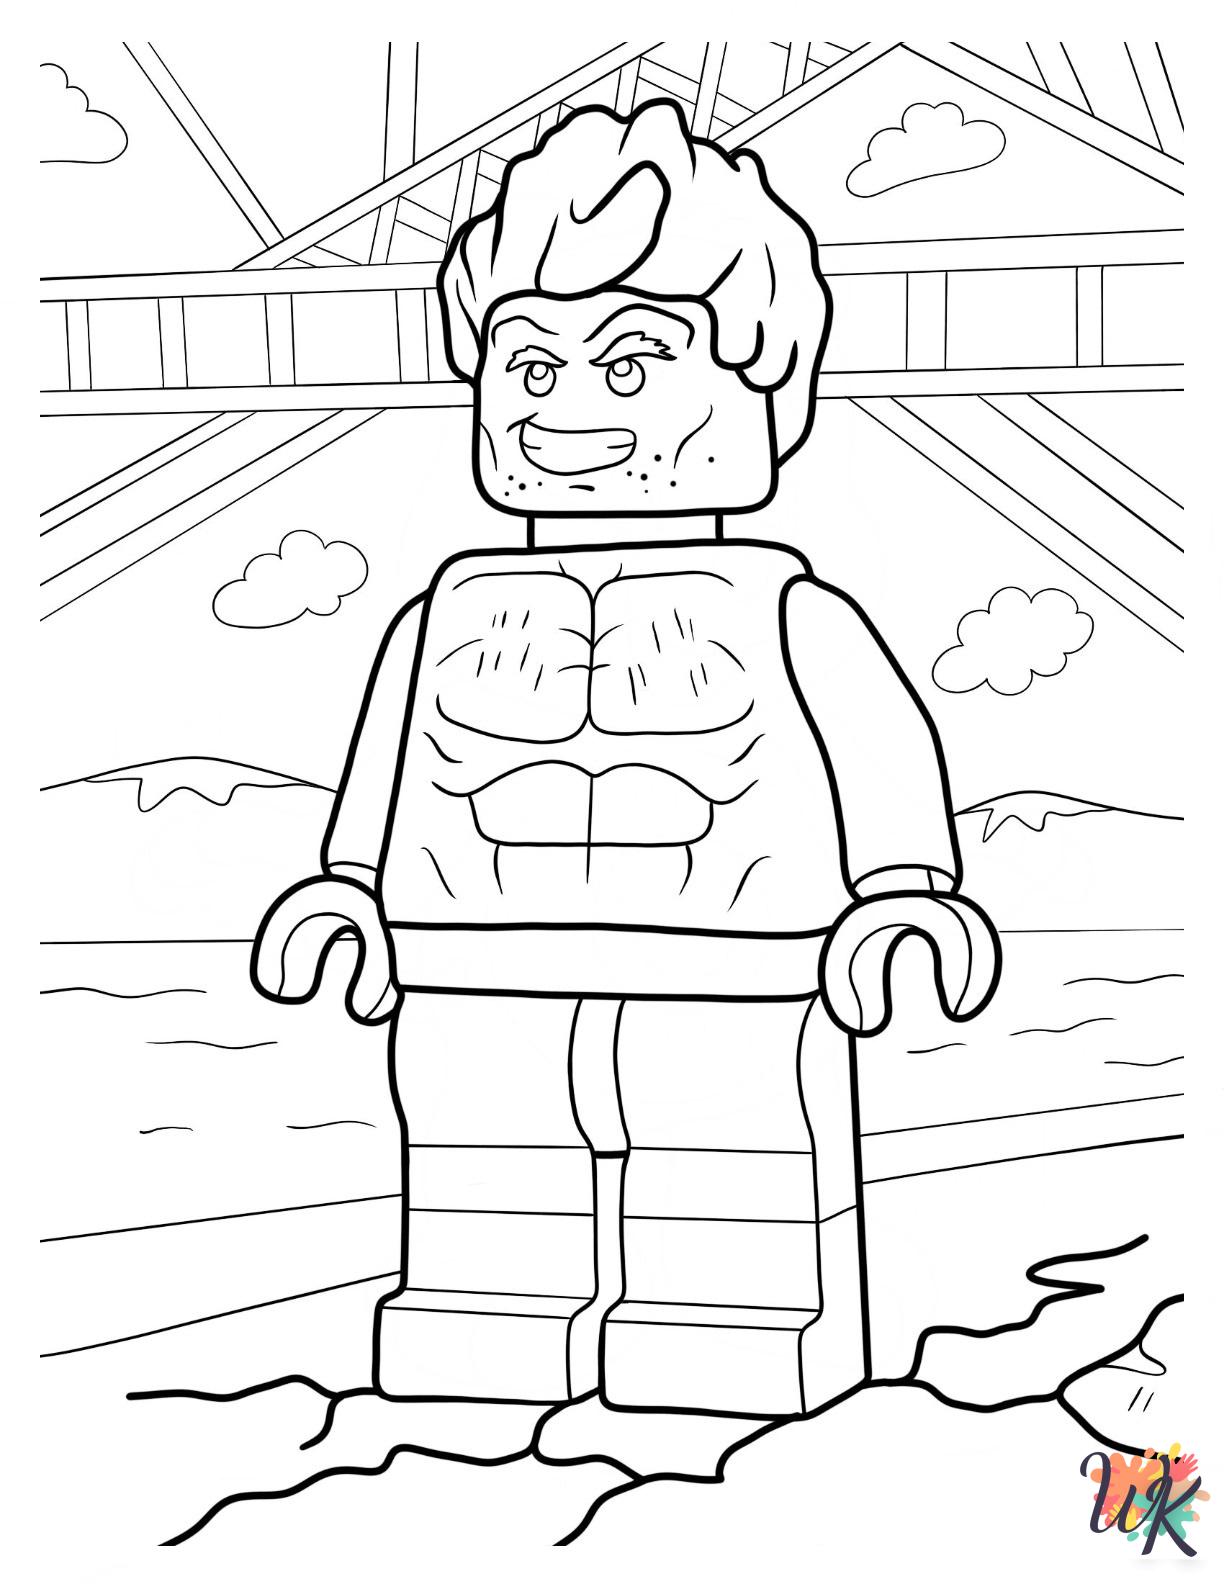 Lego Avengers coloring book pages